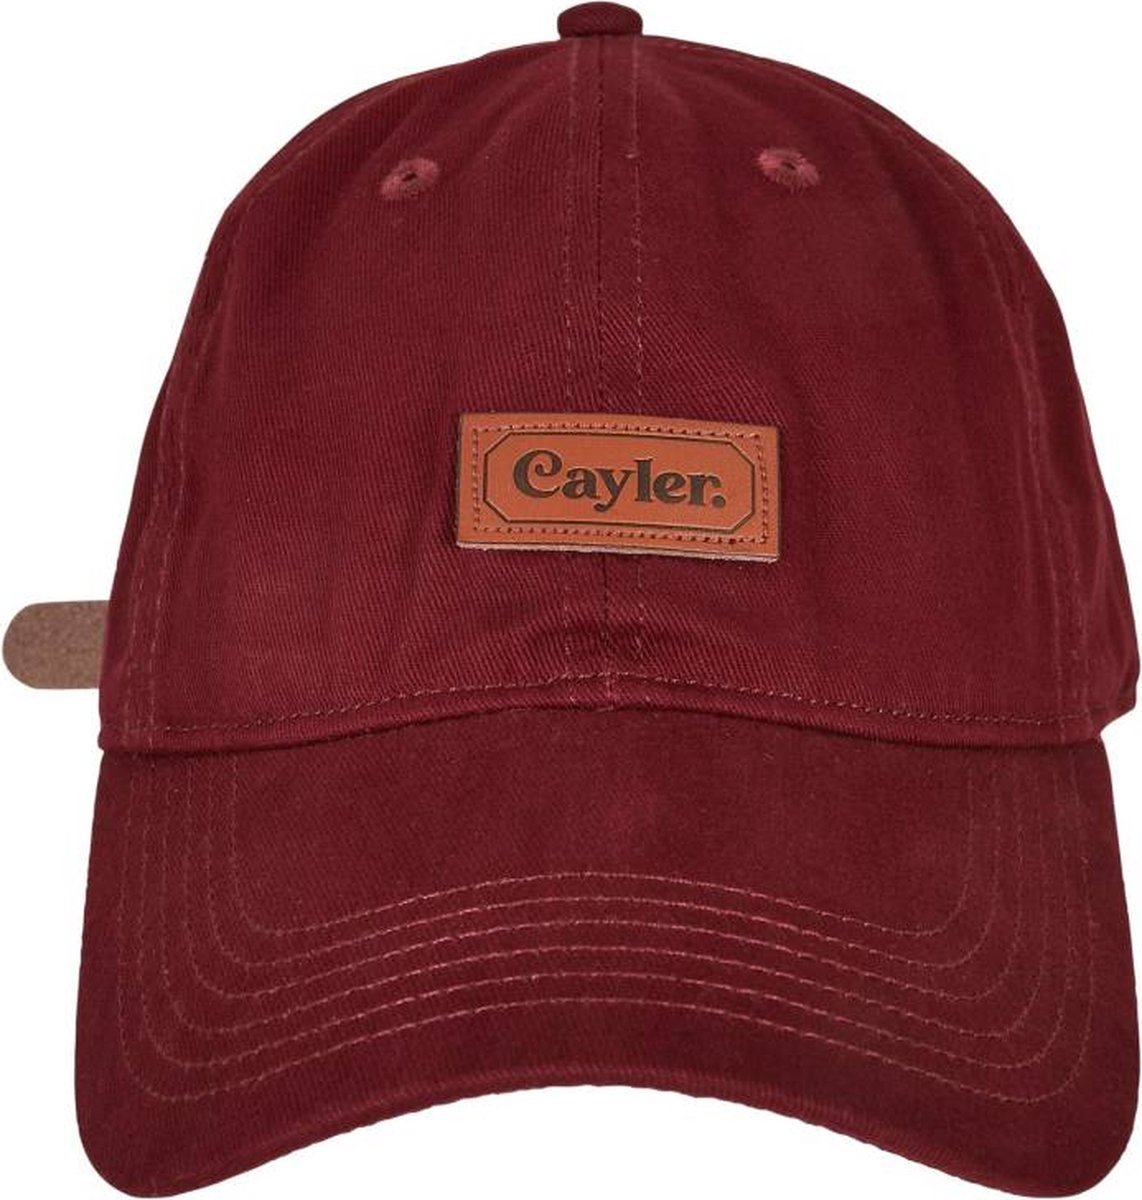 Cayler & Sons - Classy Patch Curved Verstelbare pet - Bordeaux rood